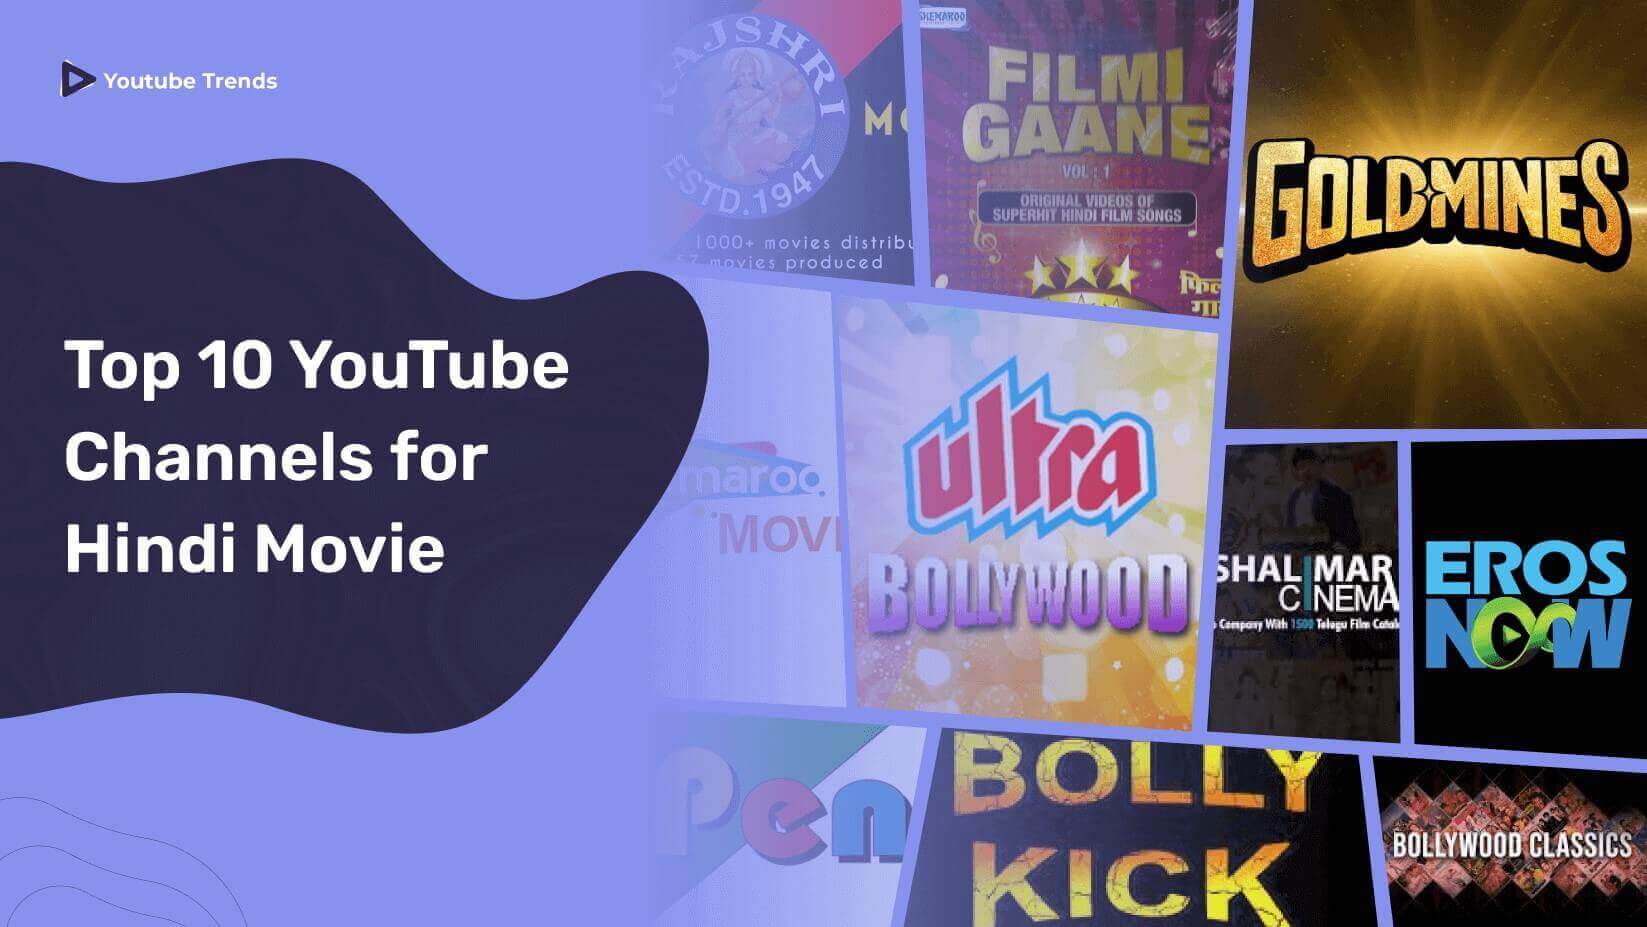 Top 10 YouTube Channels for Hindi Movie